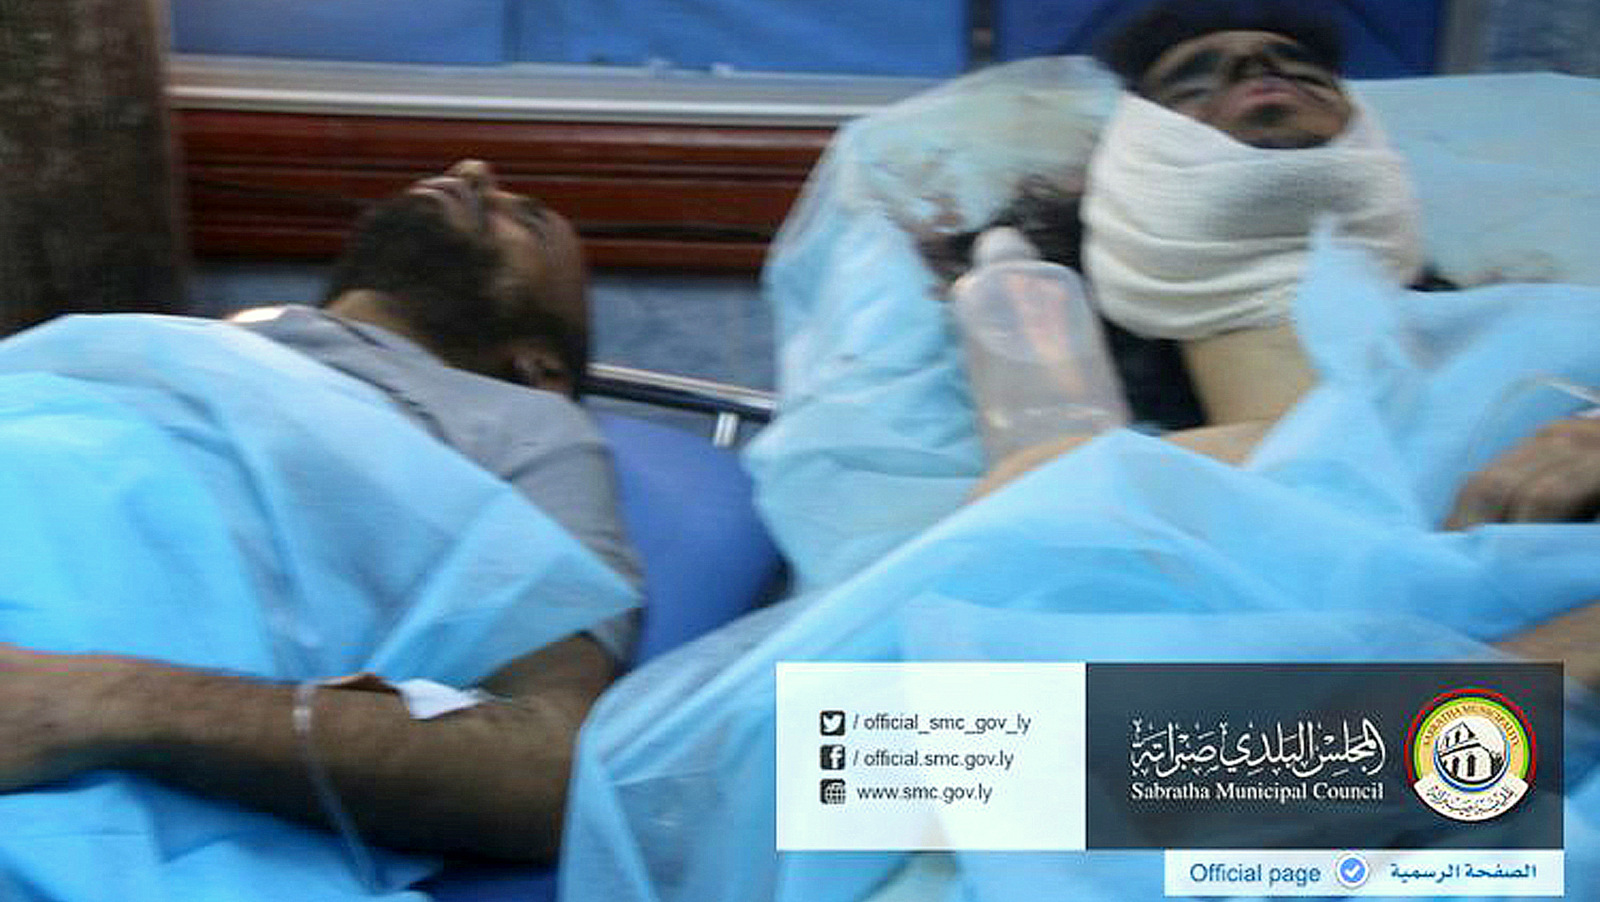 In this picture released online by the Sabratha Municipal Council on Friday, Feb. 19, 2016 wounded men lie in a hospital after U.S. airstrikes that were supposed to be aimed at an ISIS training camp in Sabratha, Libya near the Tunisian border